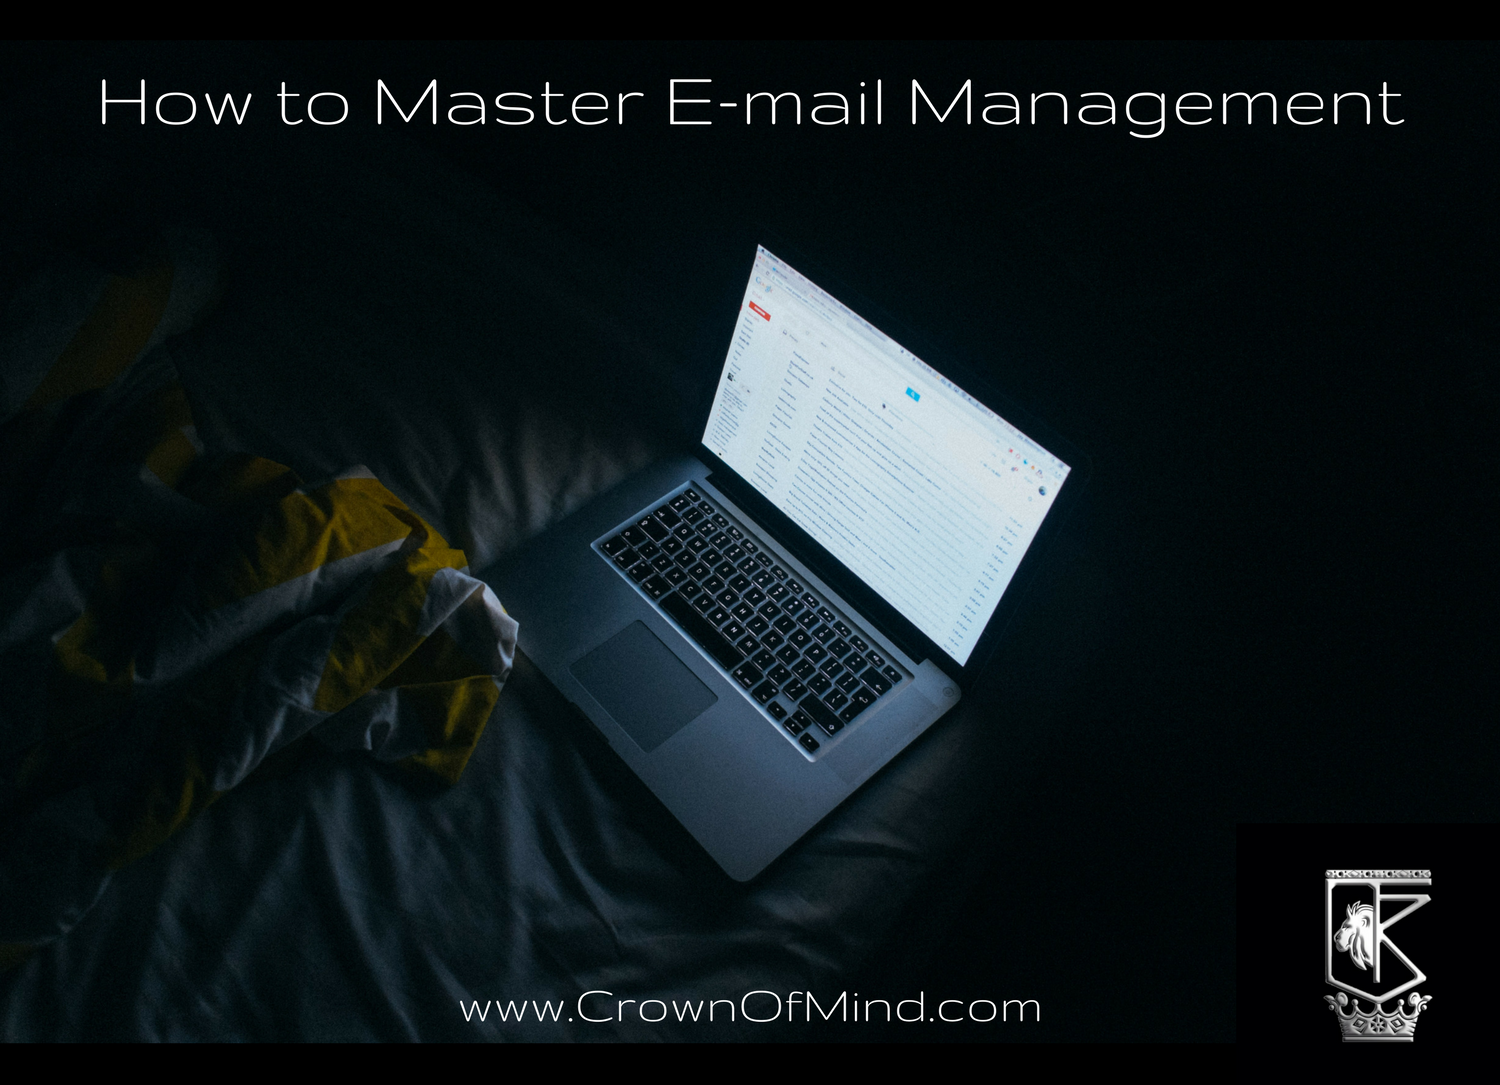 How to Master E-mail Management